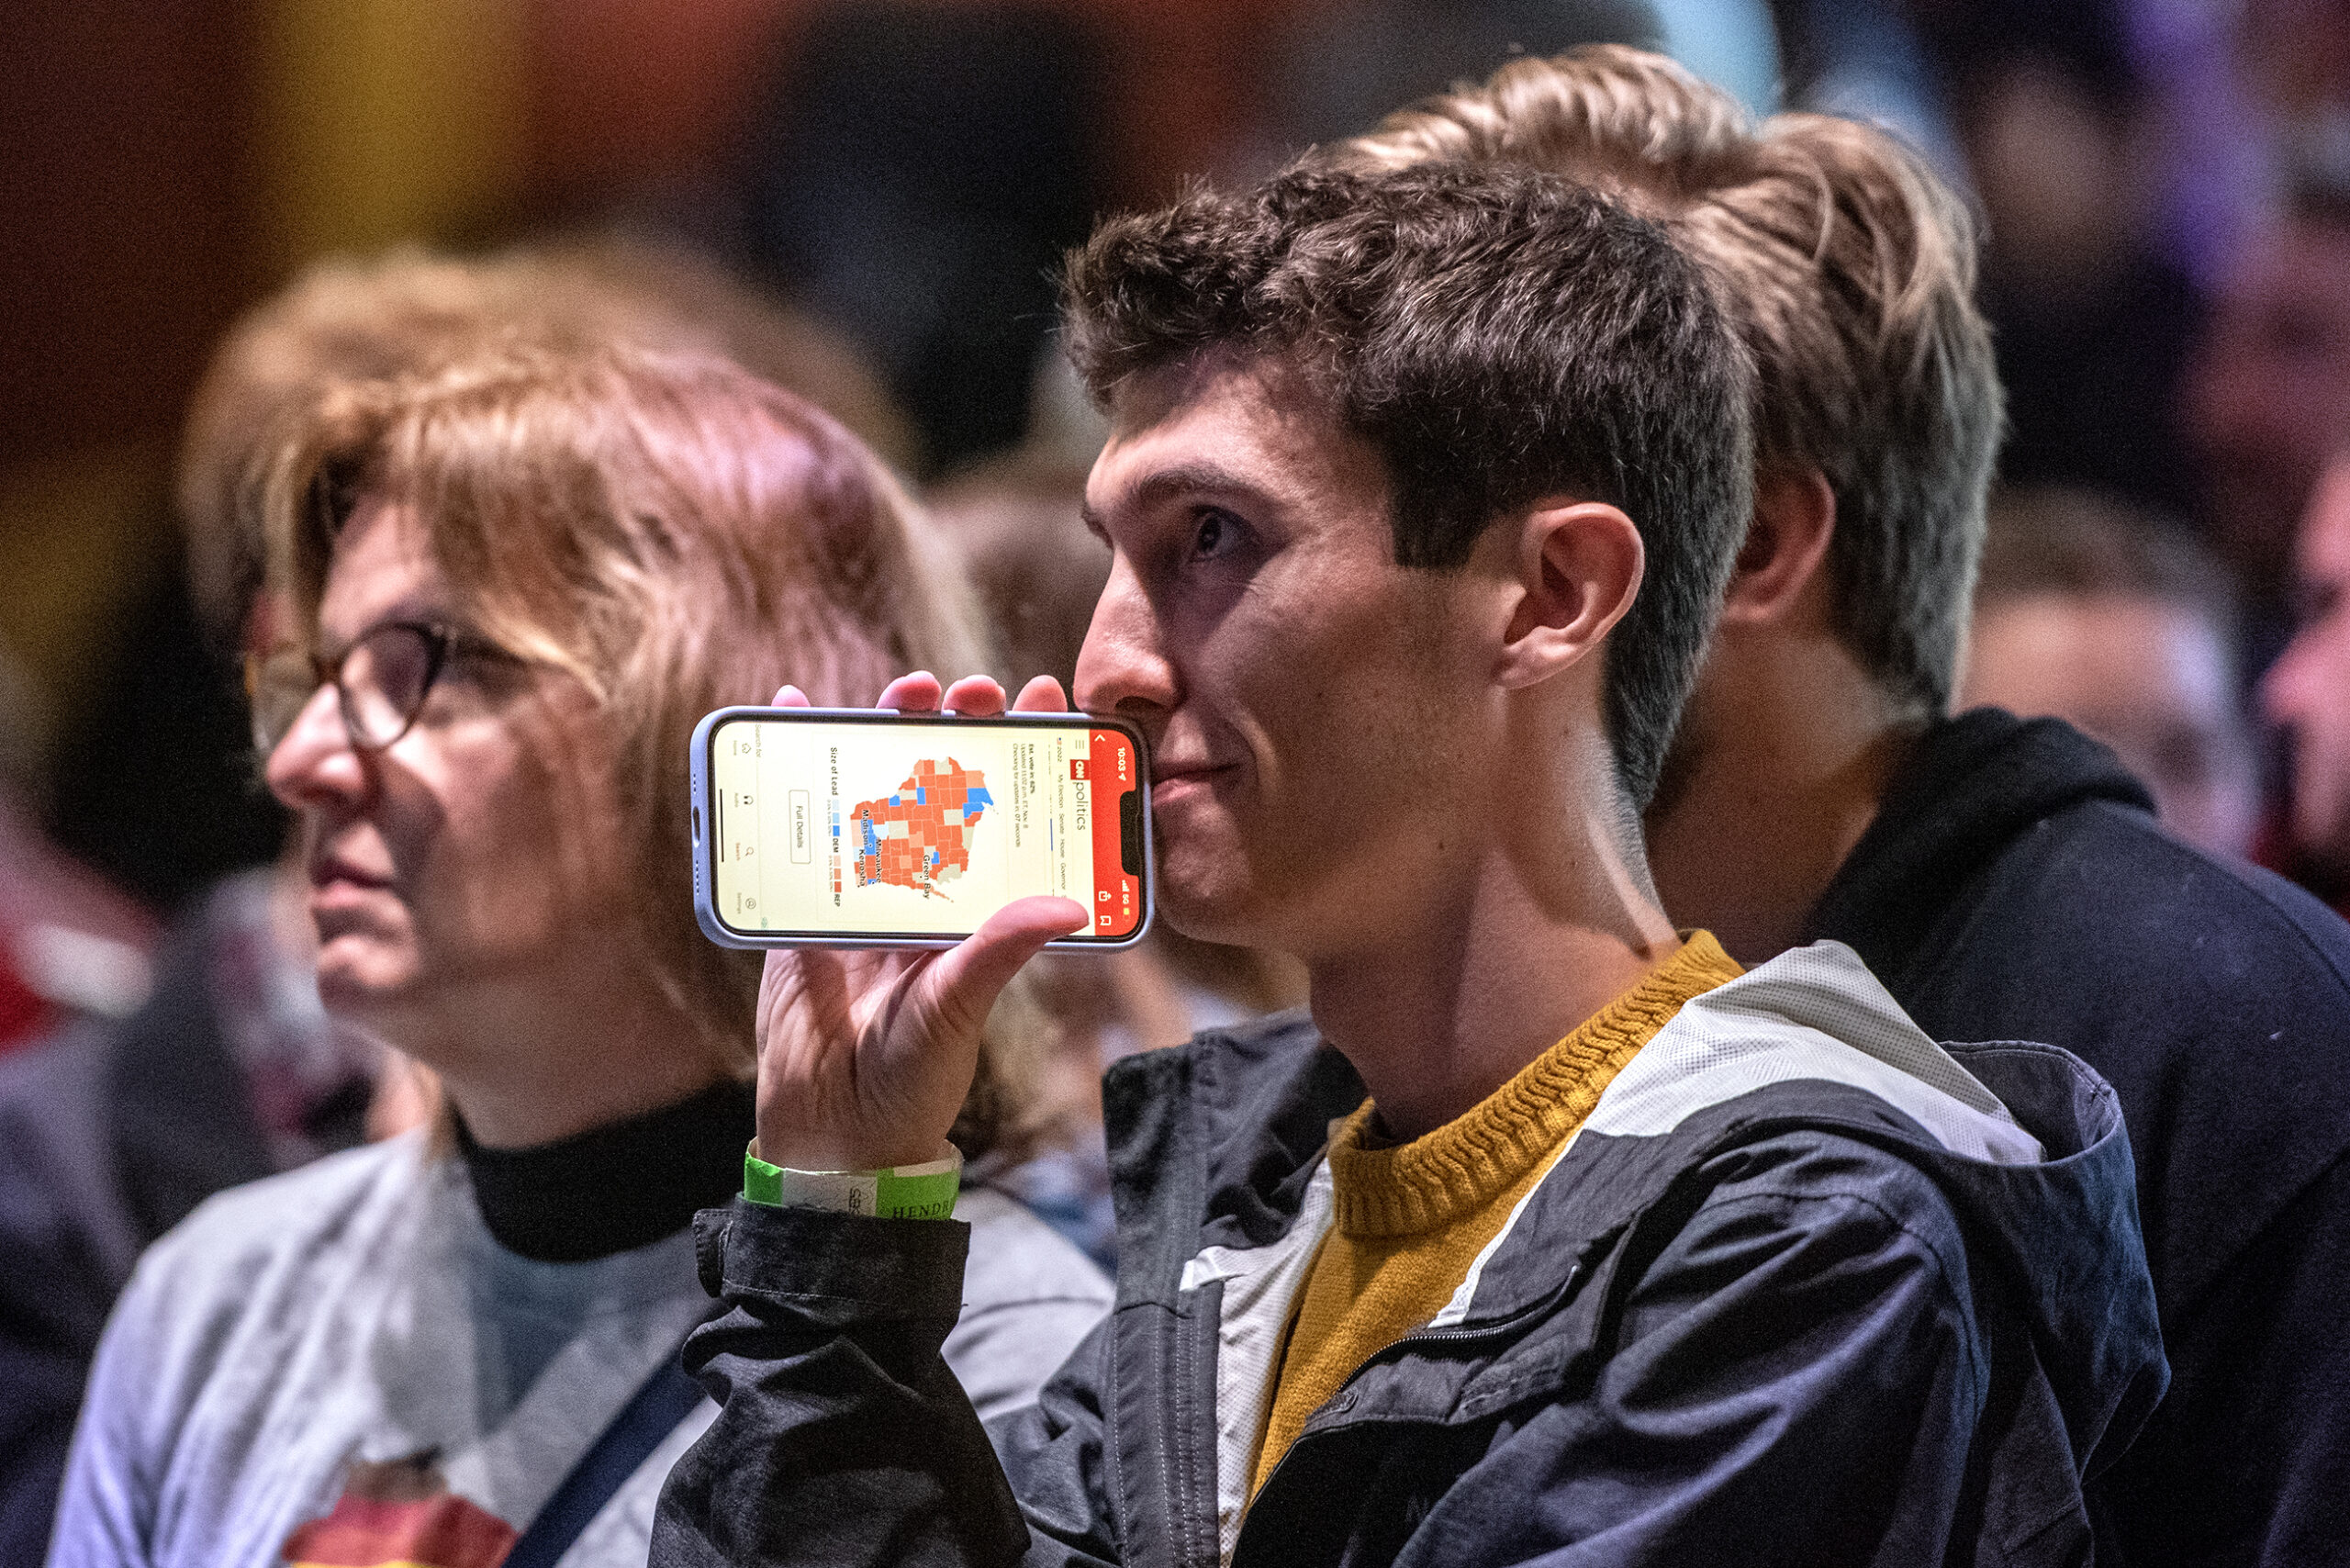 Attendees look up at a screen with pensive expressions. A phone screen shows a map of Wisconsin covered in red and blue sections, indicating election results.